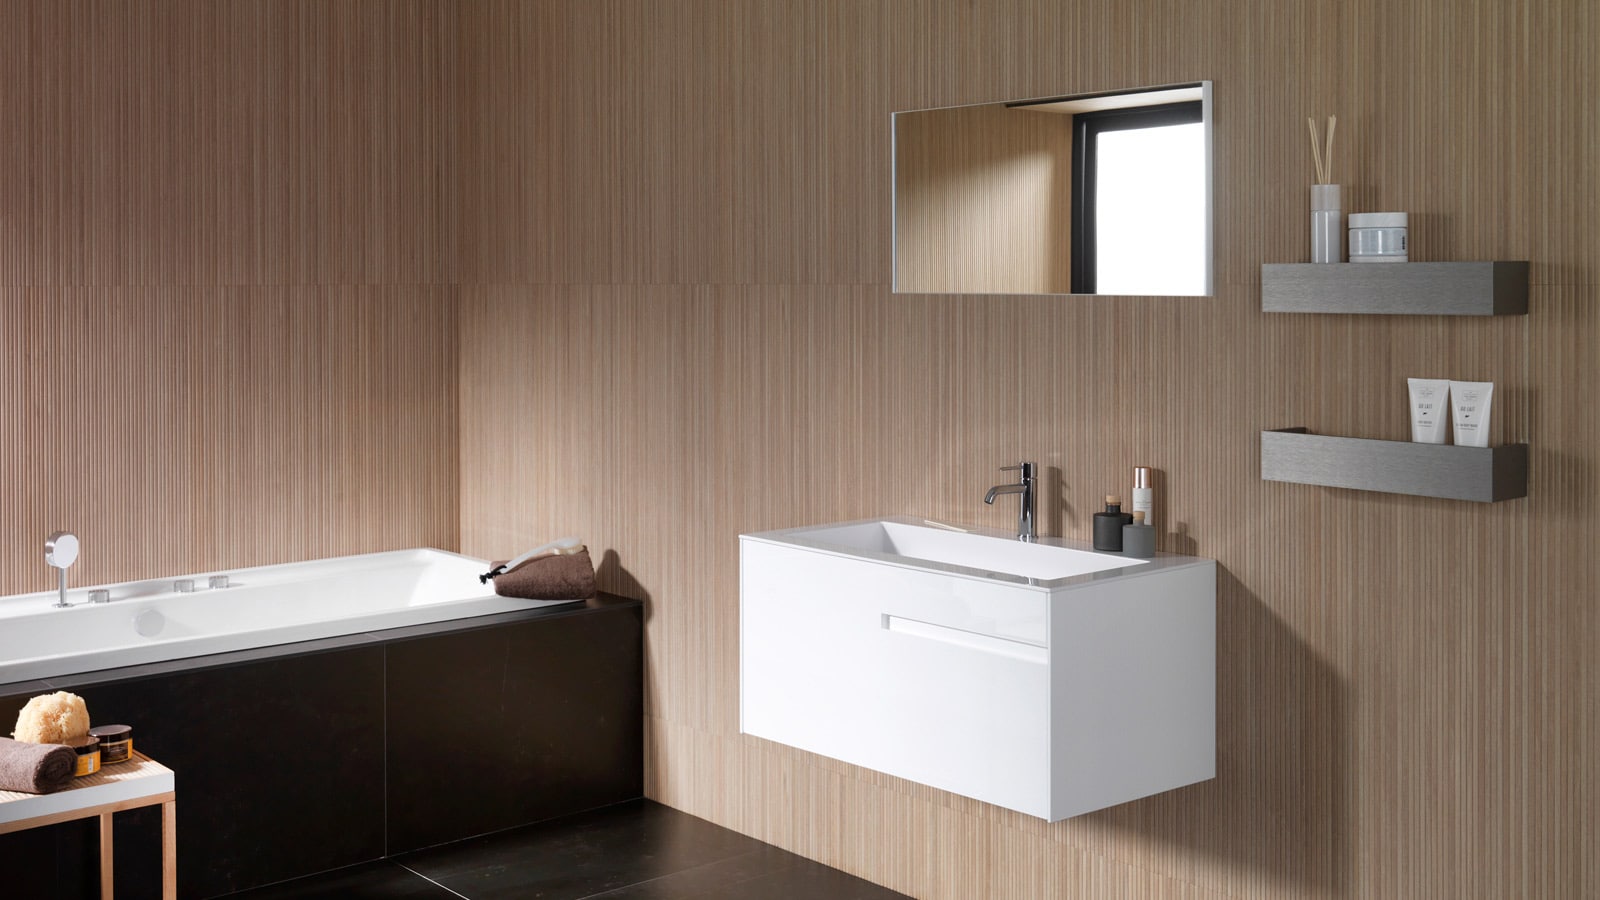 The Latest Innovations At The 26th Porcelanosa Grupo International